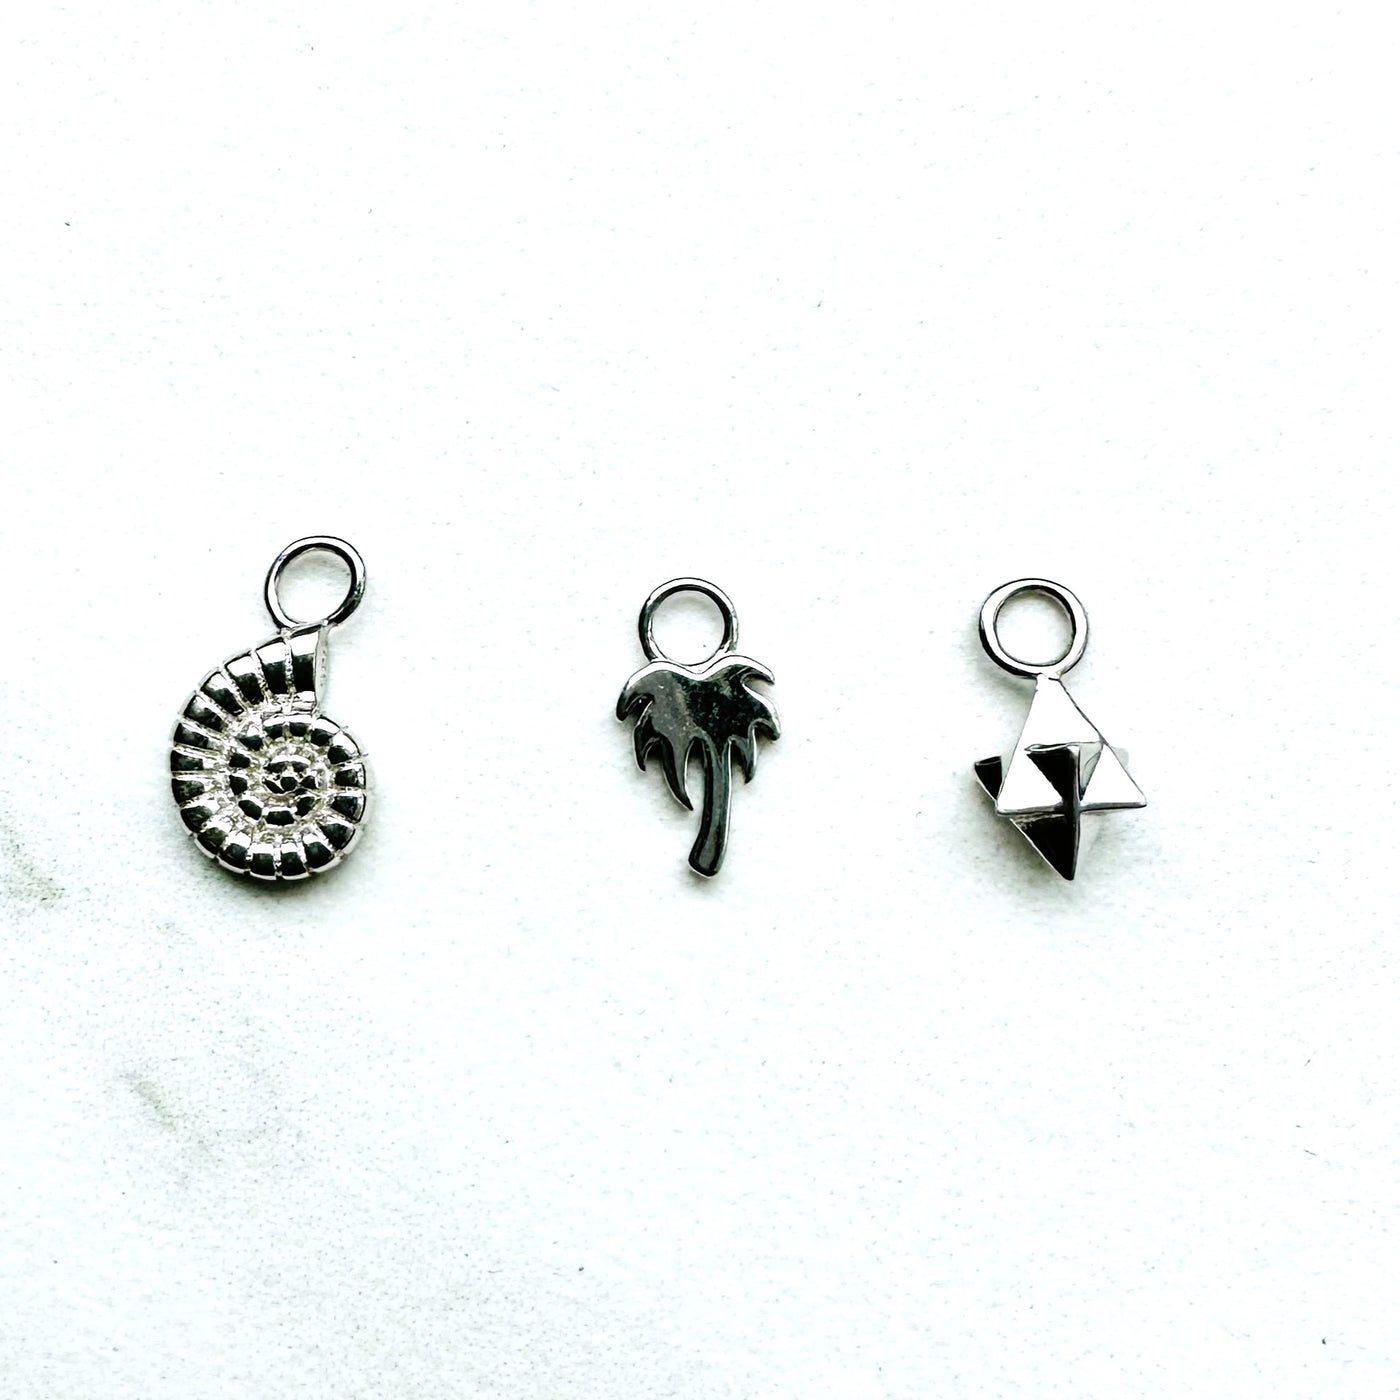 silver ammonite, palm tree and tetrahedron star necklace charms